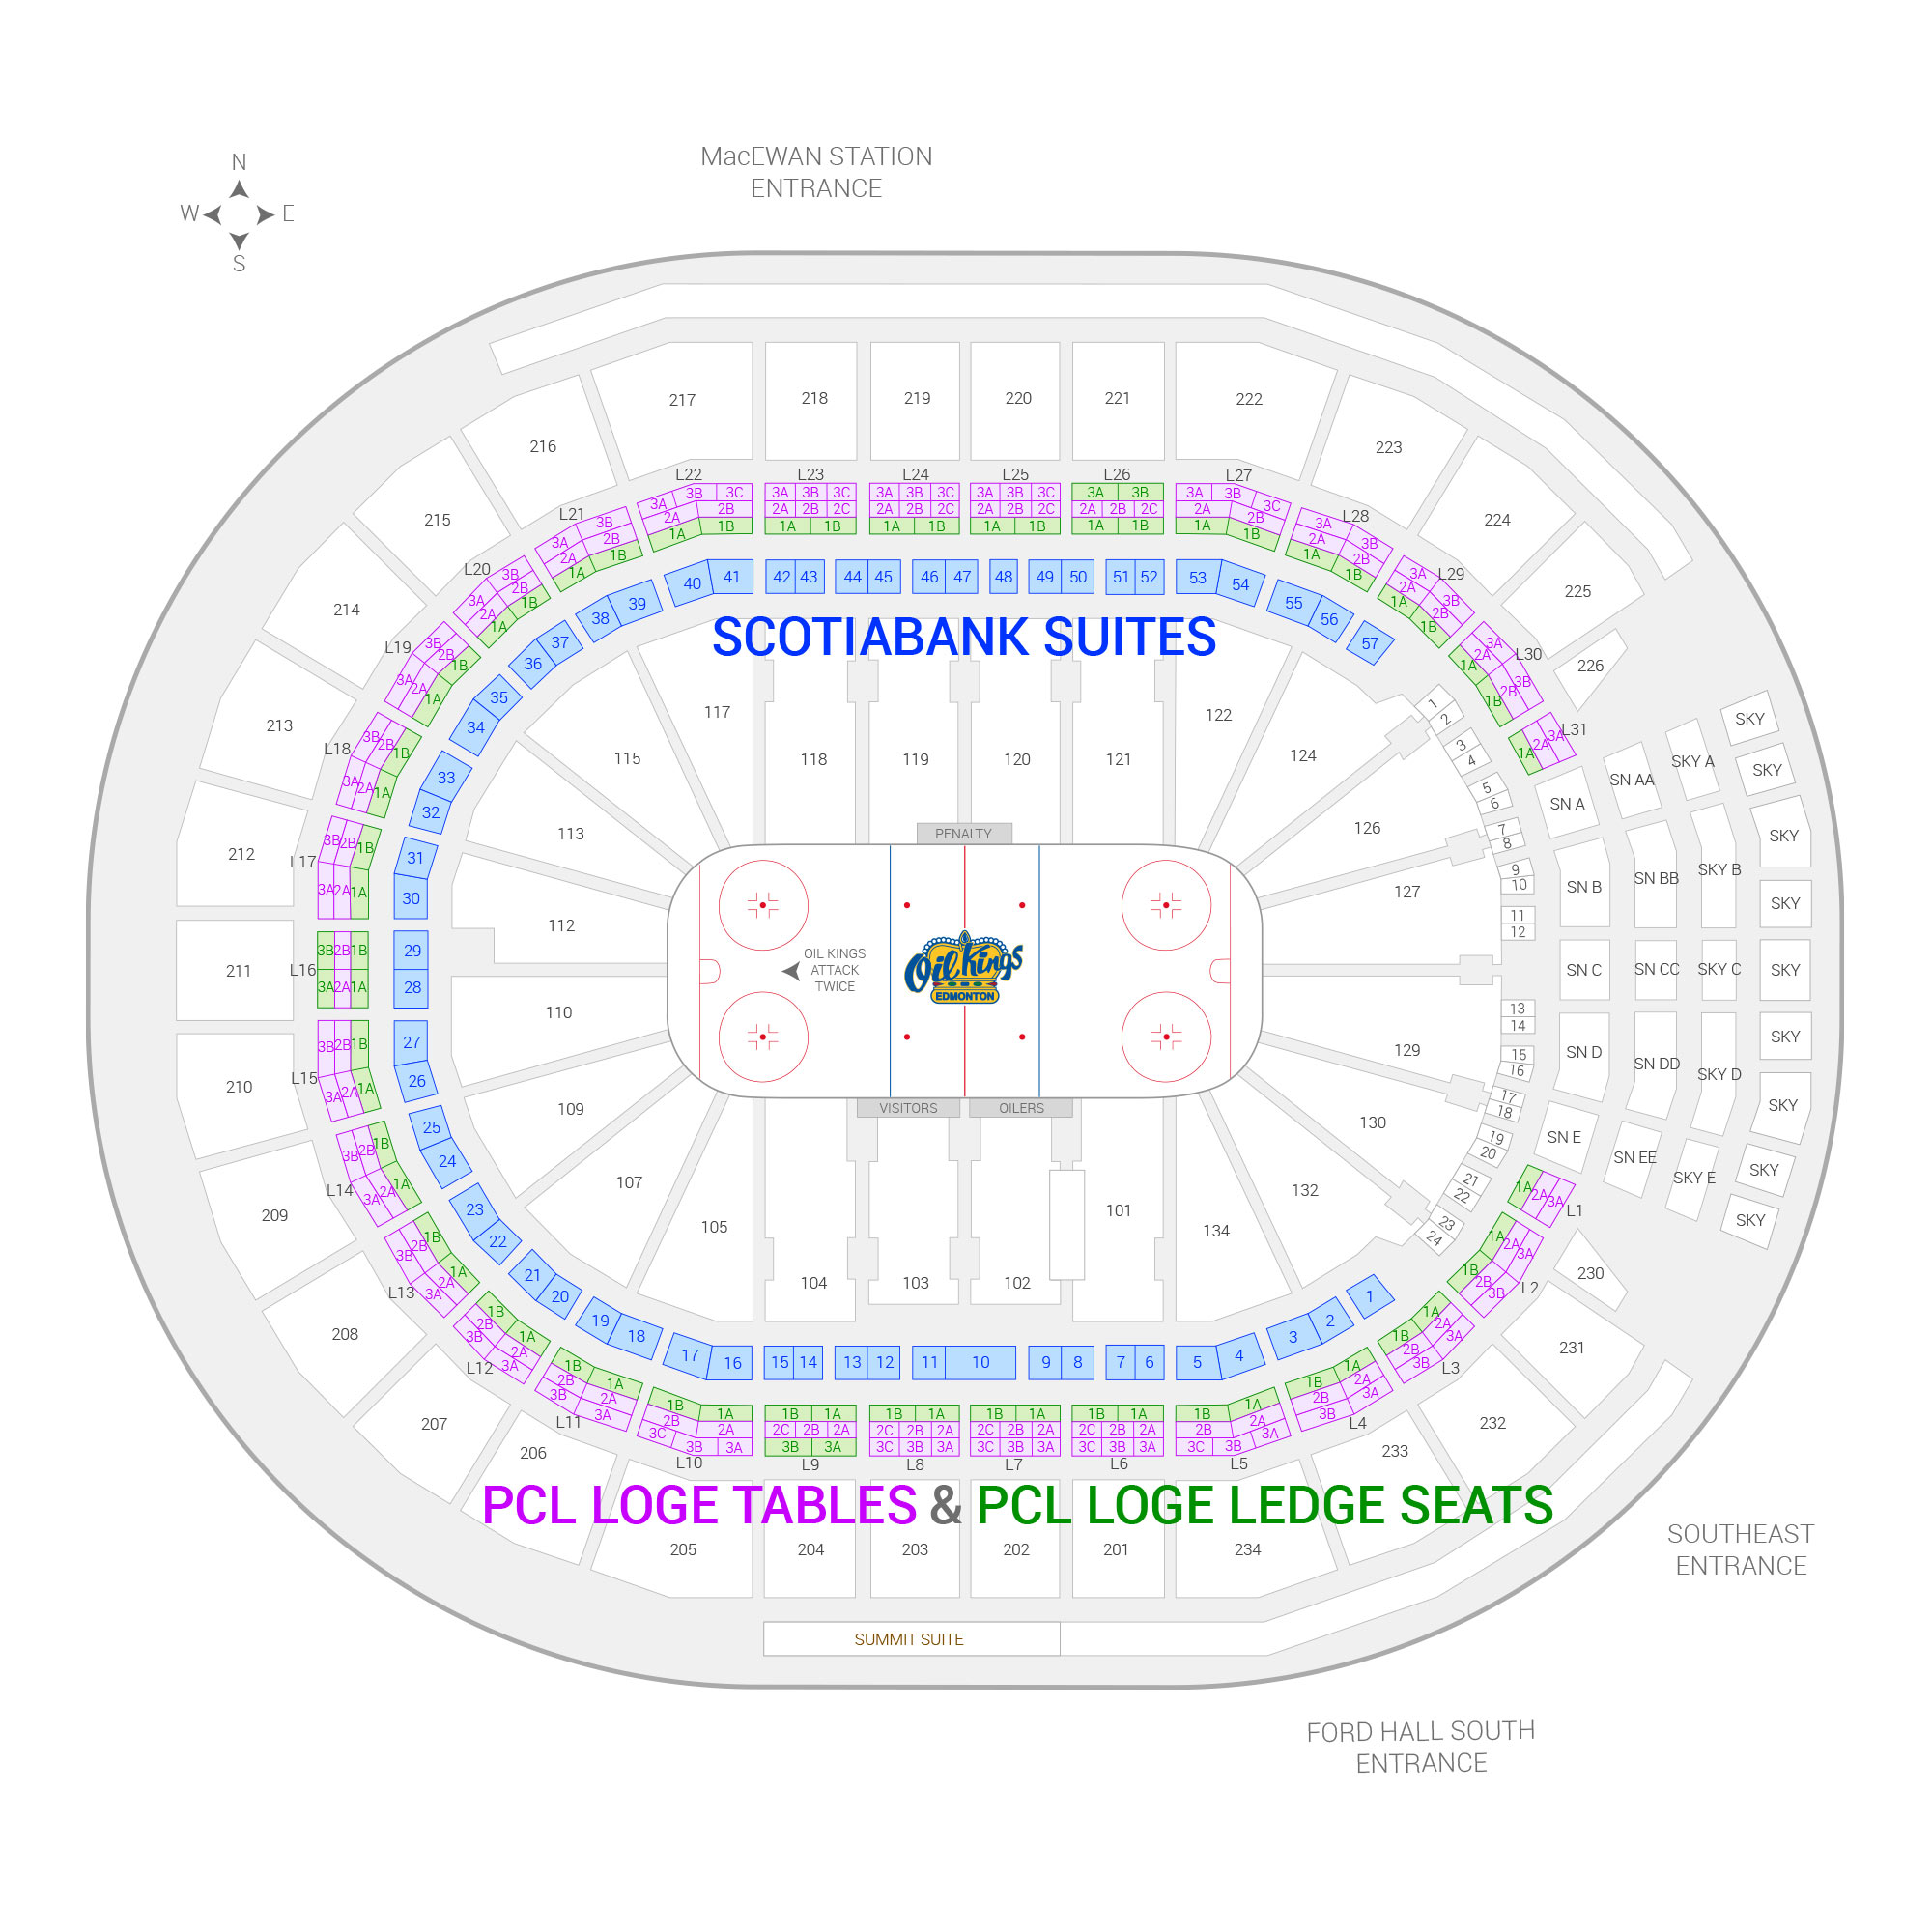 Rogers Place / Edmonton Oil Kings Suite Map and Seating Chart